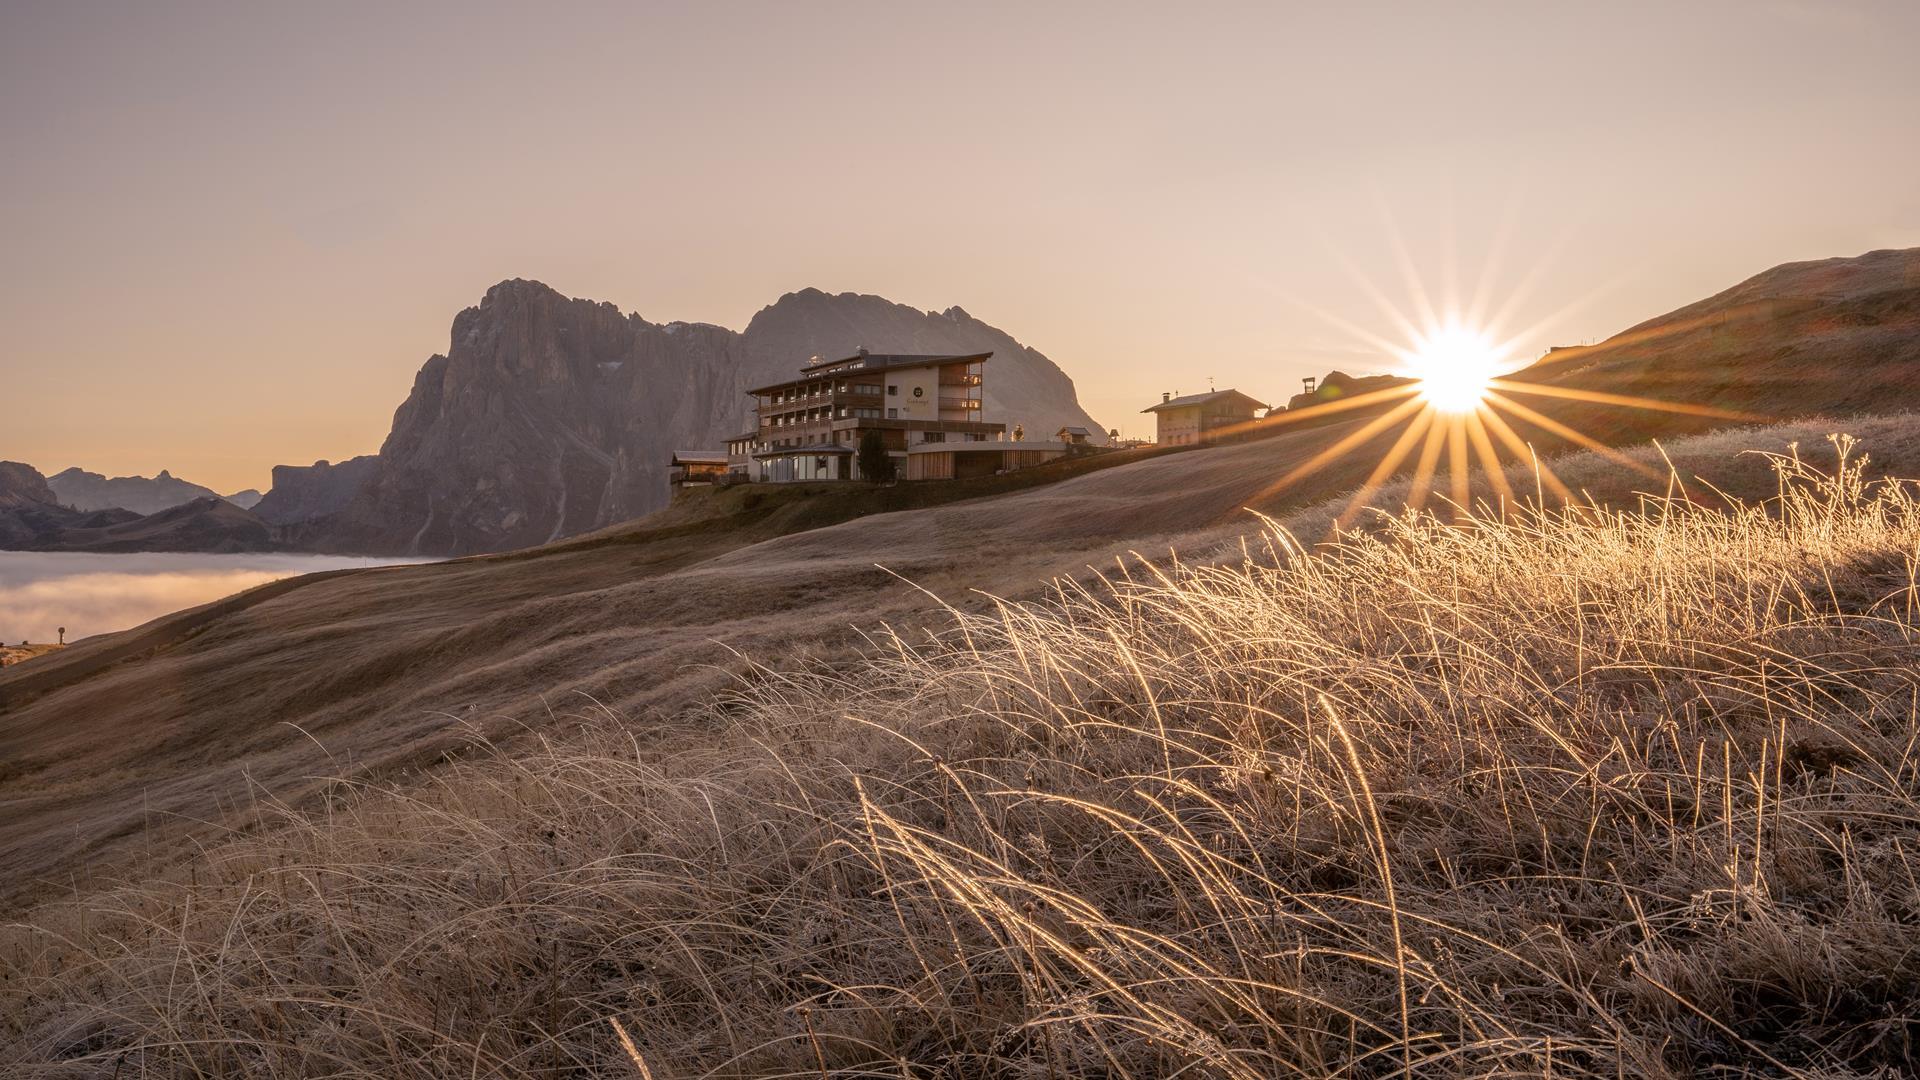 Hotel Goldknopf on the Seiser Alm